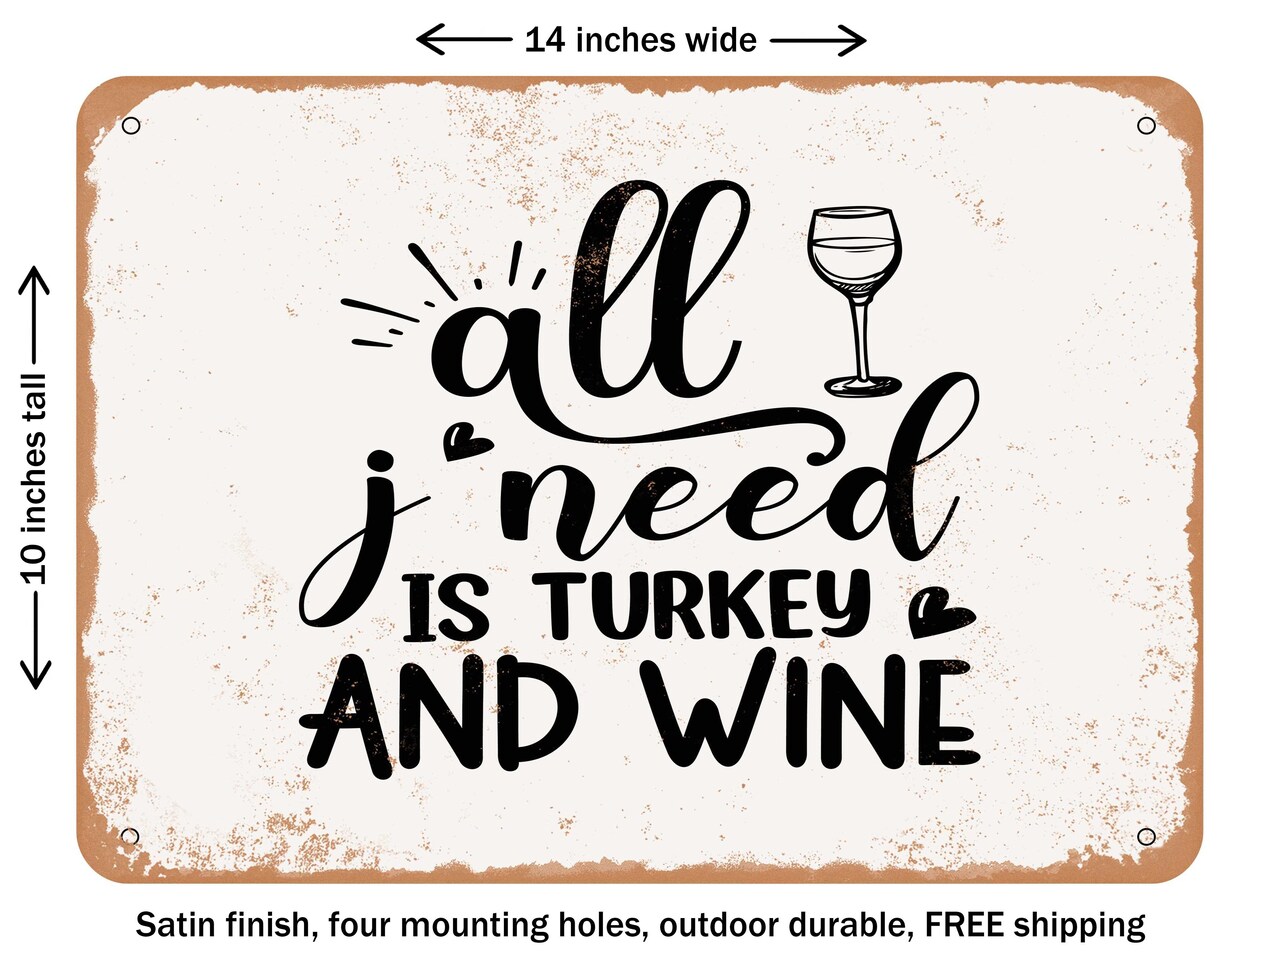 DECORATIVE METAL SIGN - All I Need is Turkey and Wine - Vintage Rusty Look